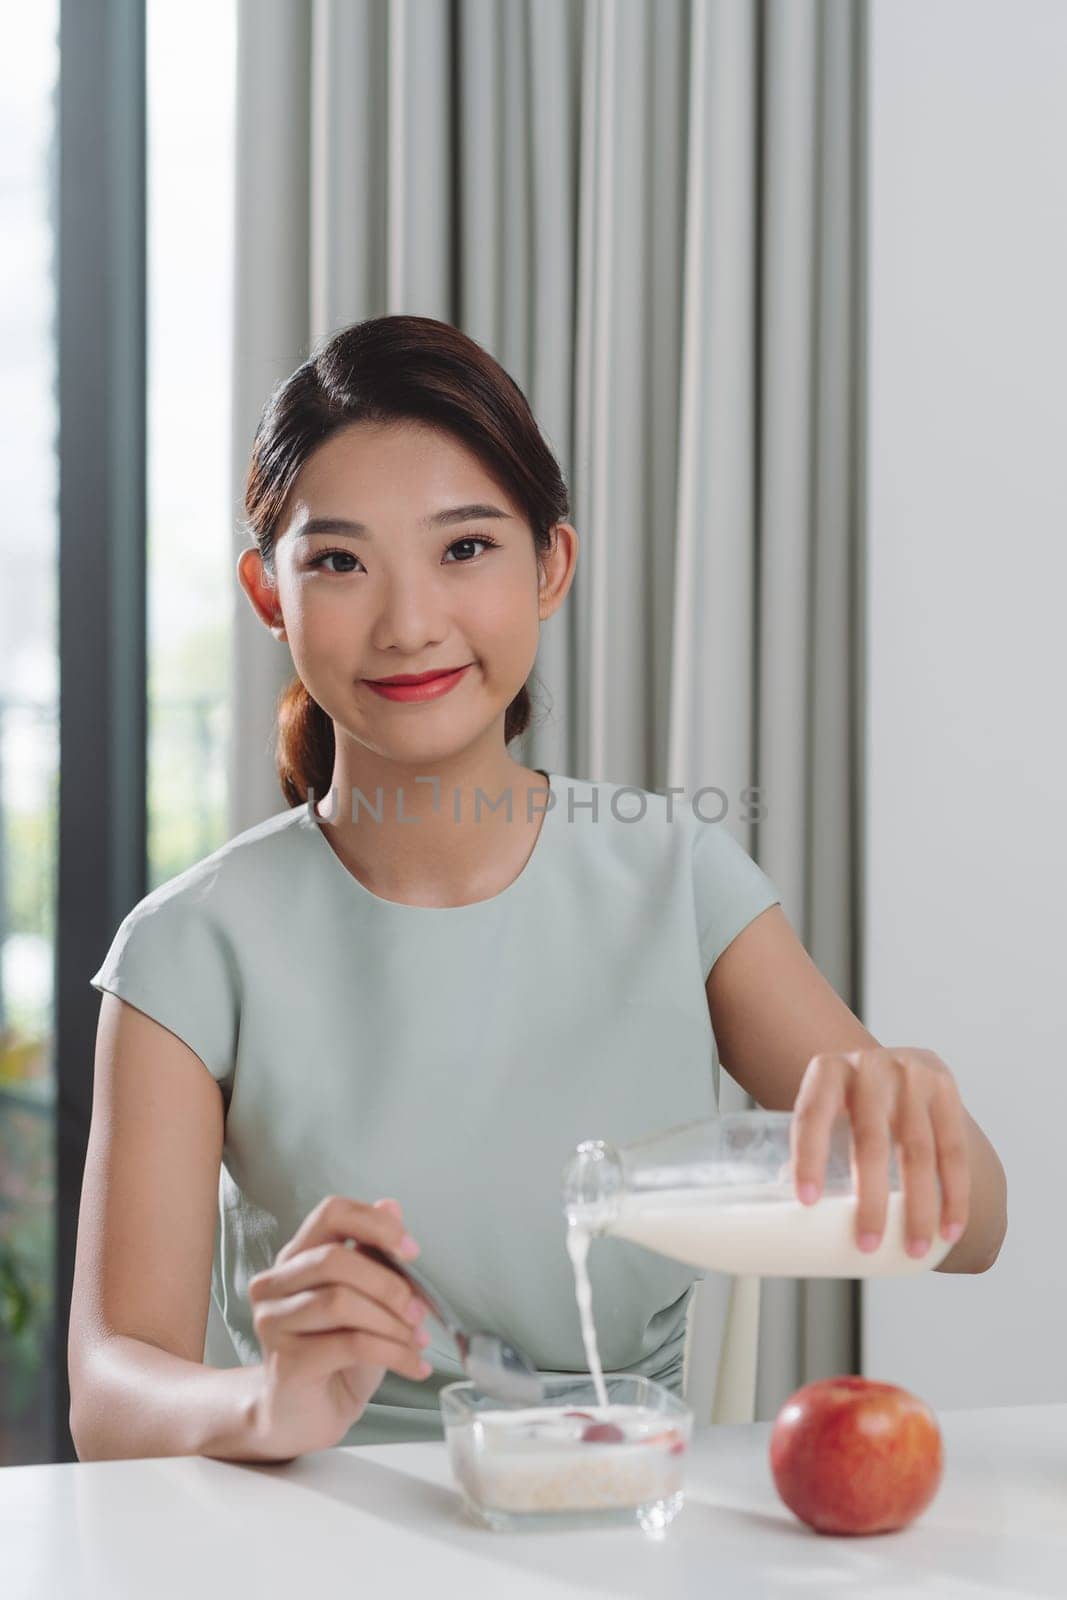 Smiling young woman pouring milk into a bowl while sitting and having breakfast 